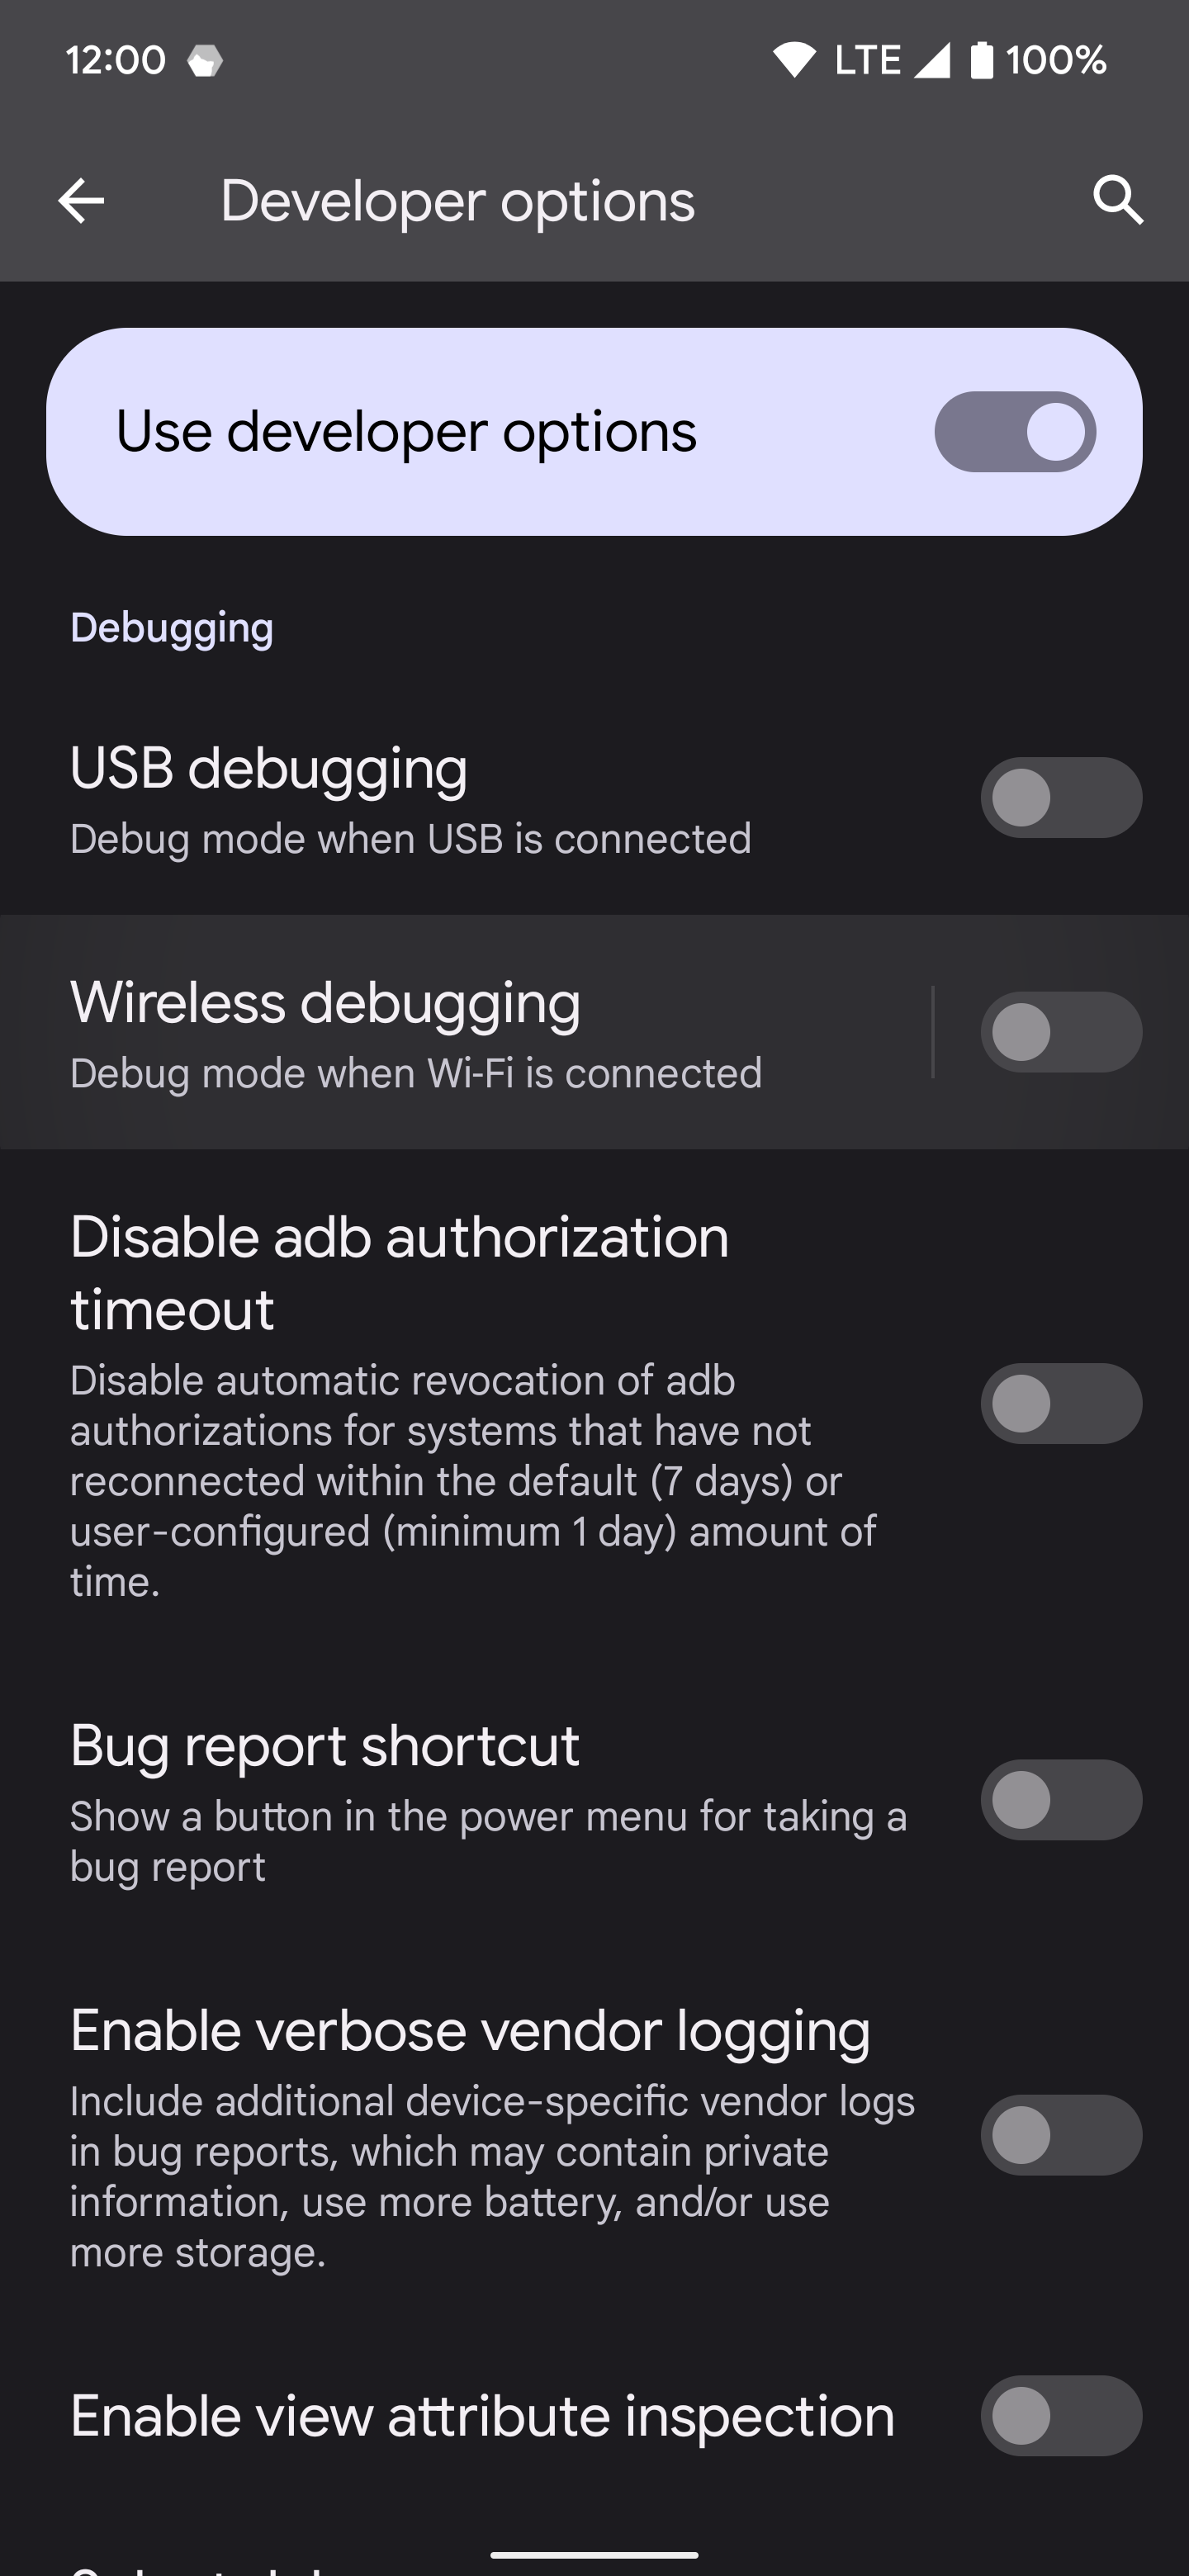 Tapping the wireless debugging option.